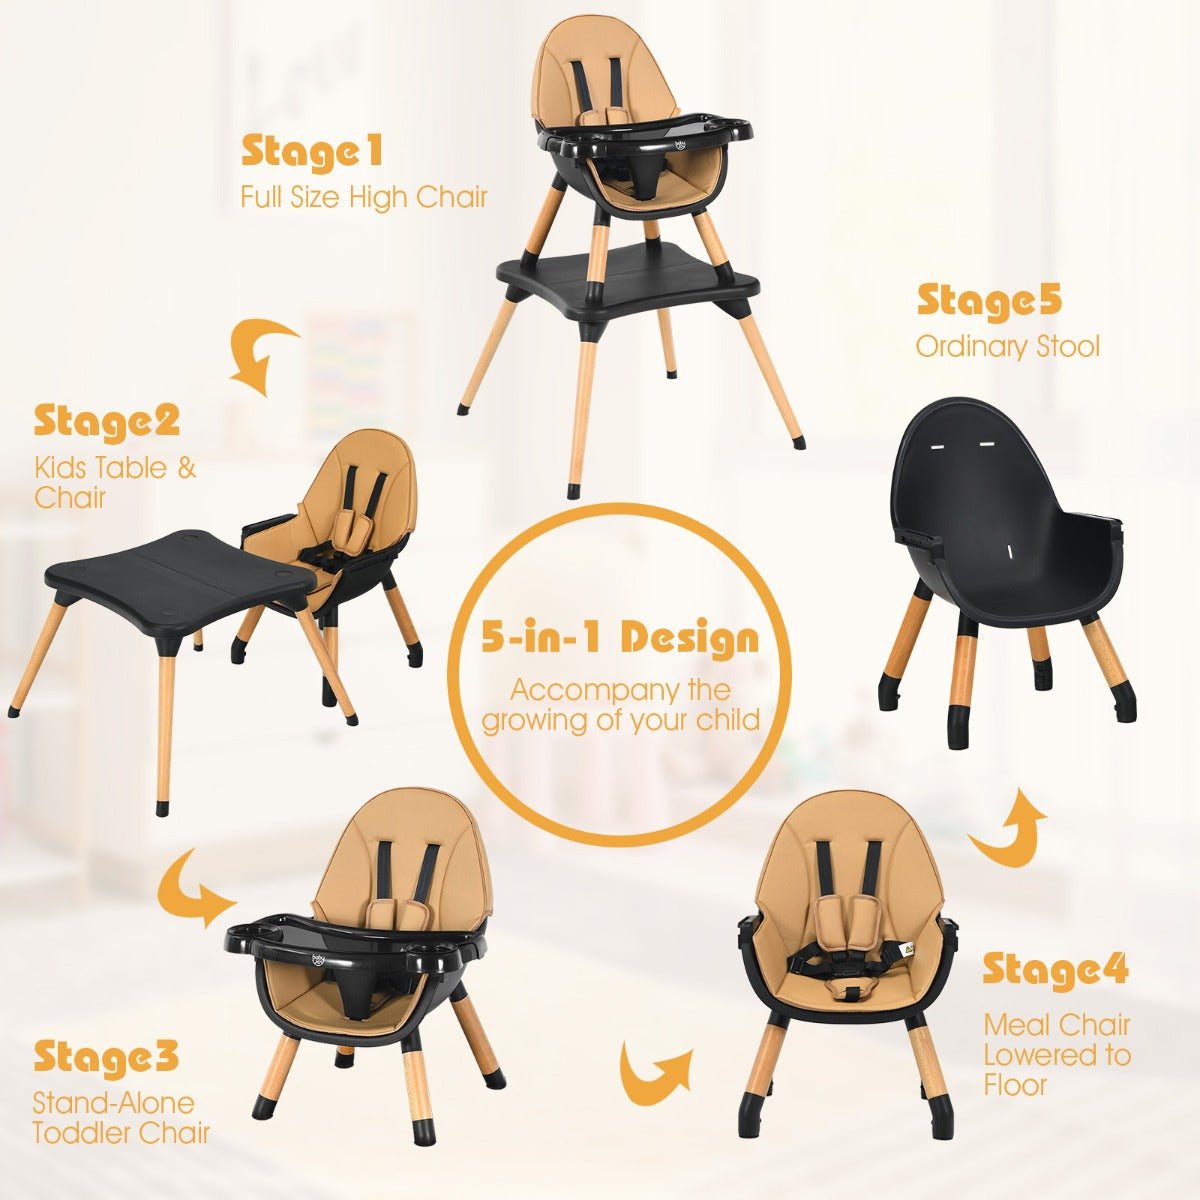 5-in-1 Wooden High Chair - Convertible Coffee Toddler Seating